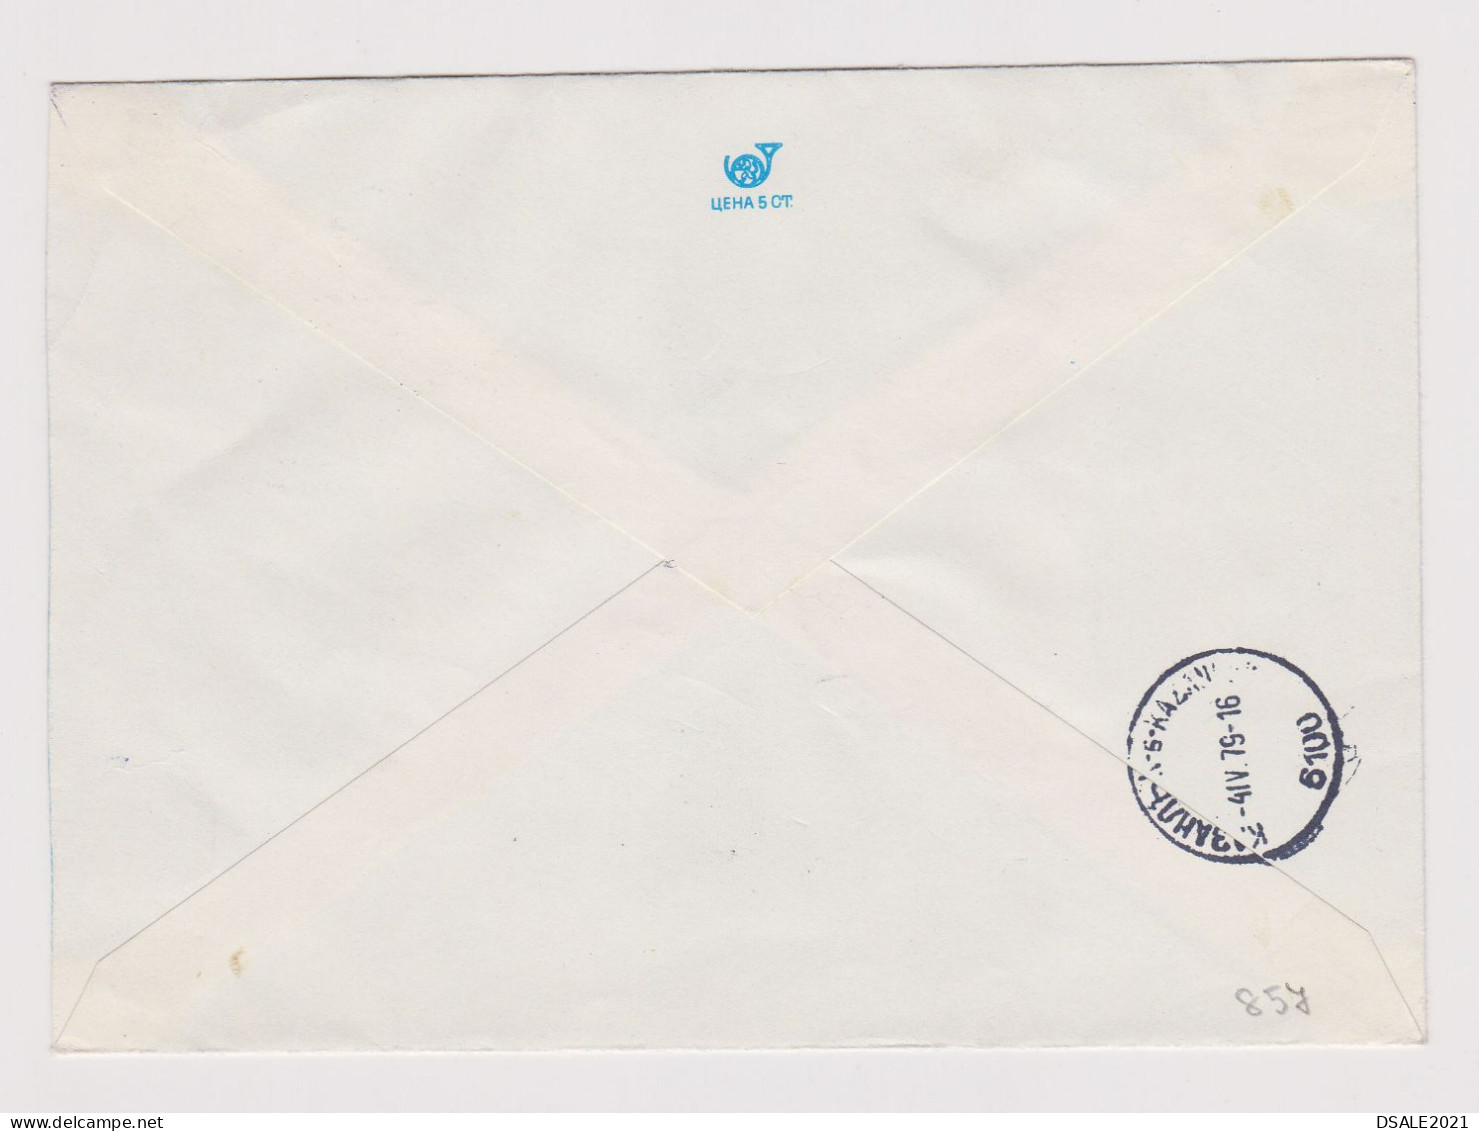 Bulgaria Bulgarien 1979 Ganzsachen R-Brief, Postal Stationery Cover, Registered W/Topic Stamps Flower, Architecture /857 - Covers